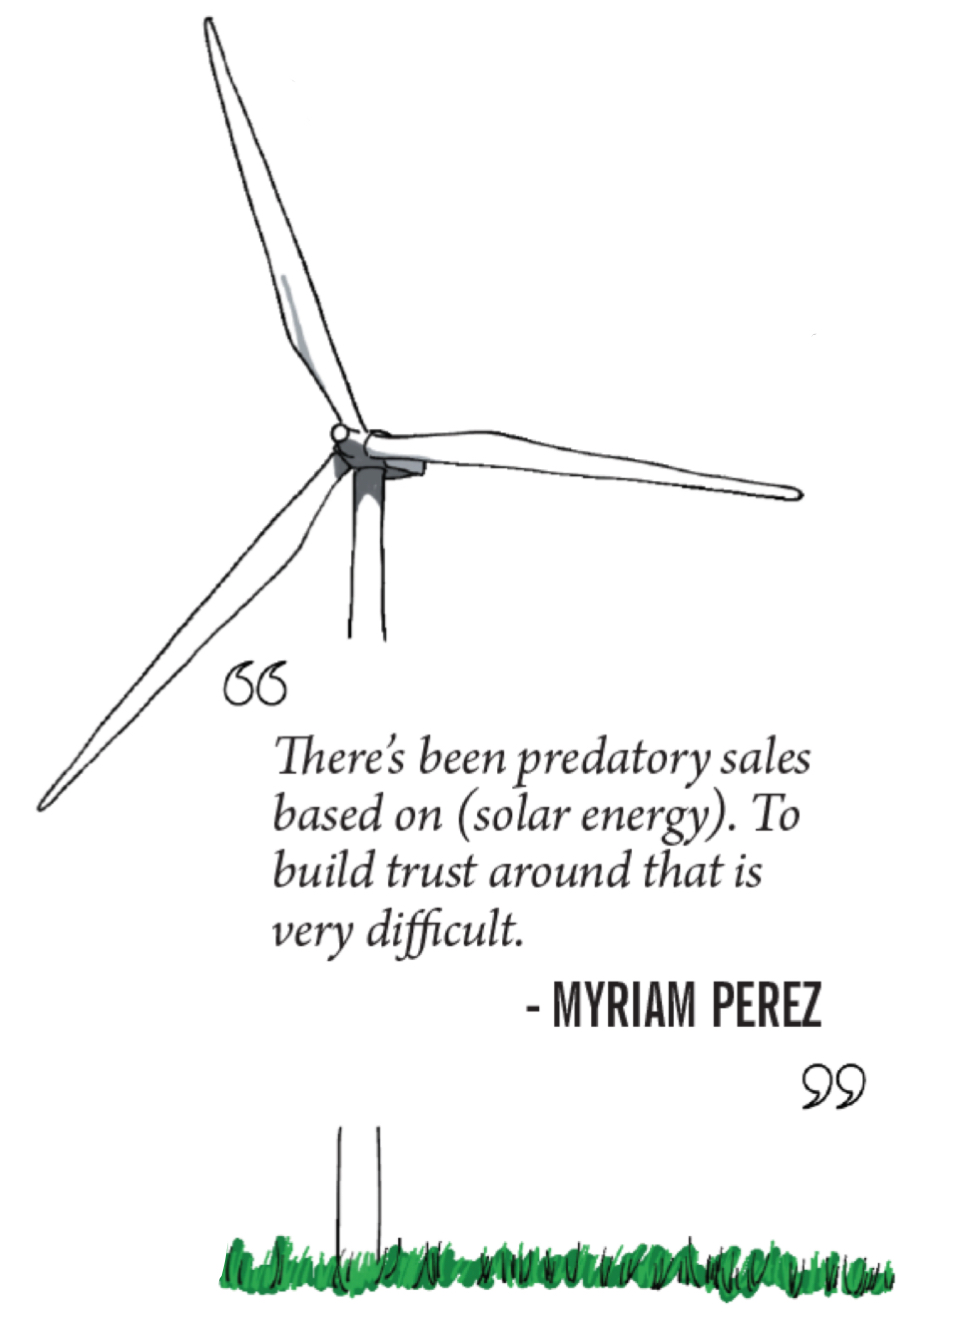 A wind turbine illustration is the backdrop for this quote. "There's been predatory sales based on (solar energy). To build trust around that is very difficult." -- Myriam Perez